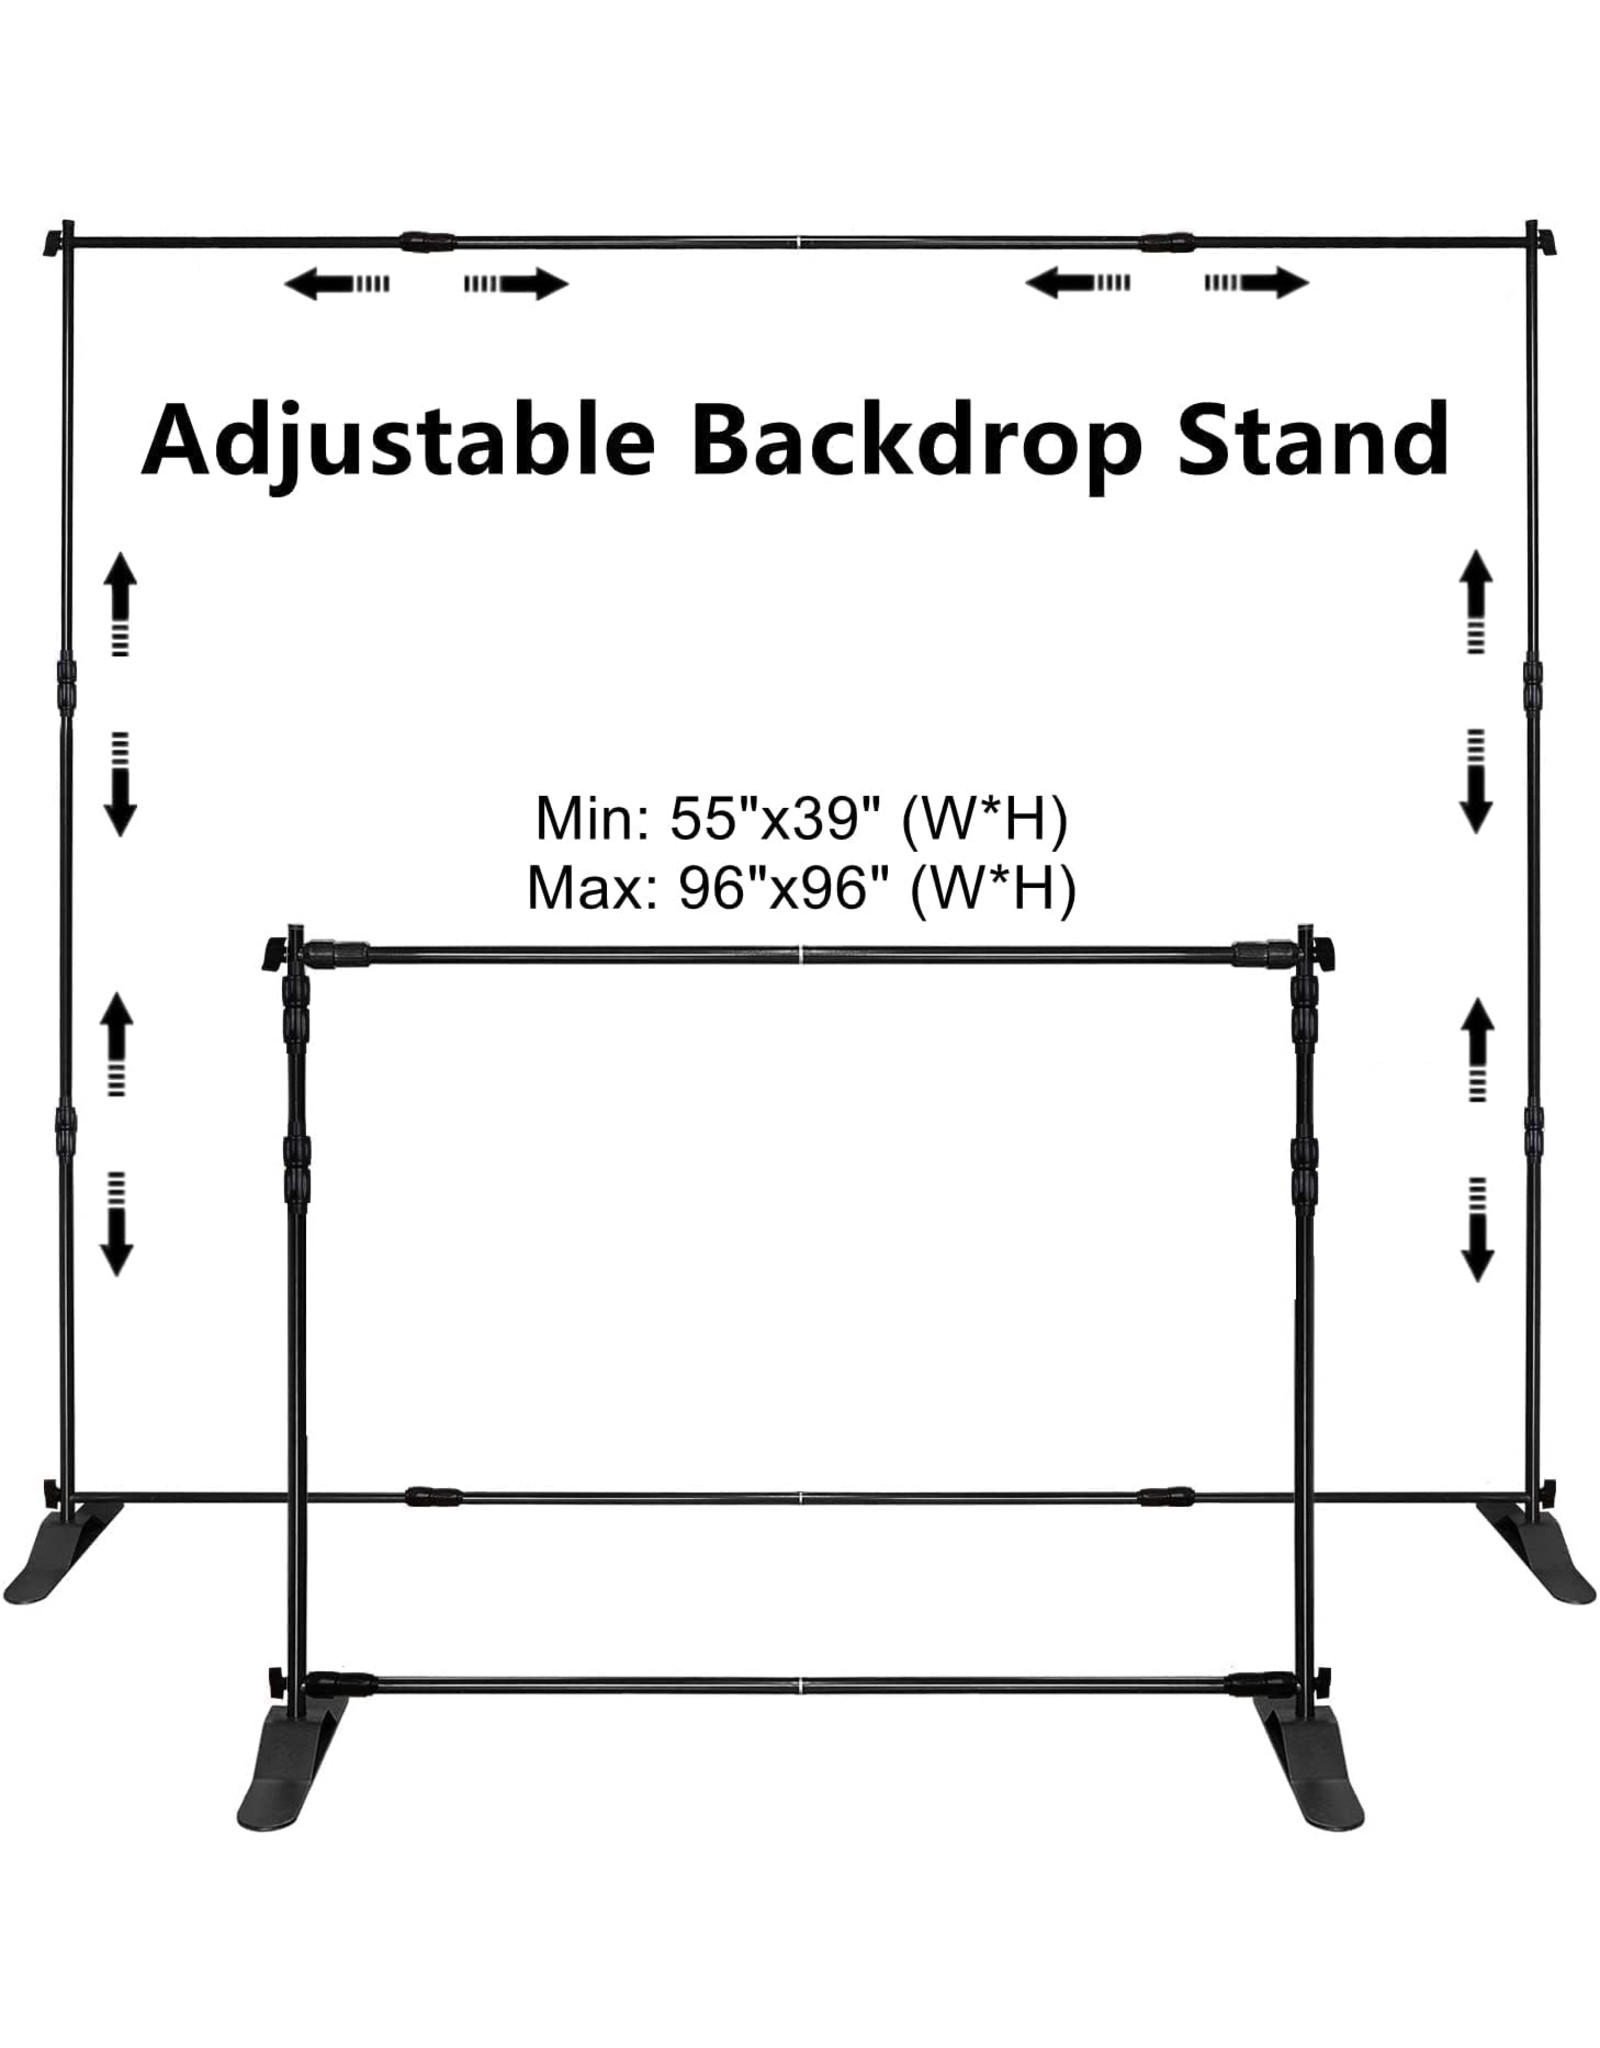 Photography Booth Carrying Case Free Photo Backdrop Banner Adjustable Stand 10 X 8 with Telescopic Poles for Trade Show Display Stand Step and Repeat Frame Stand 